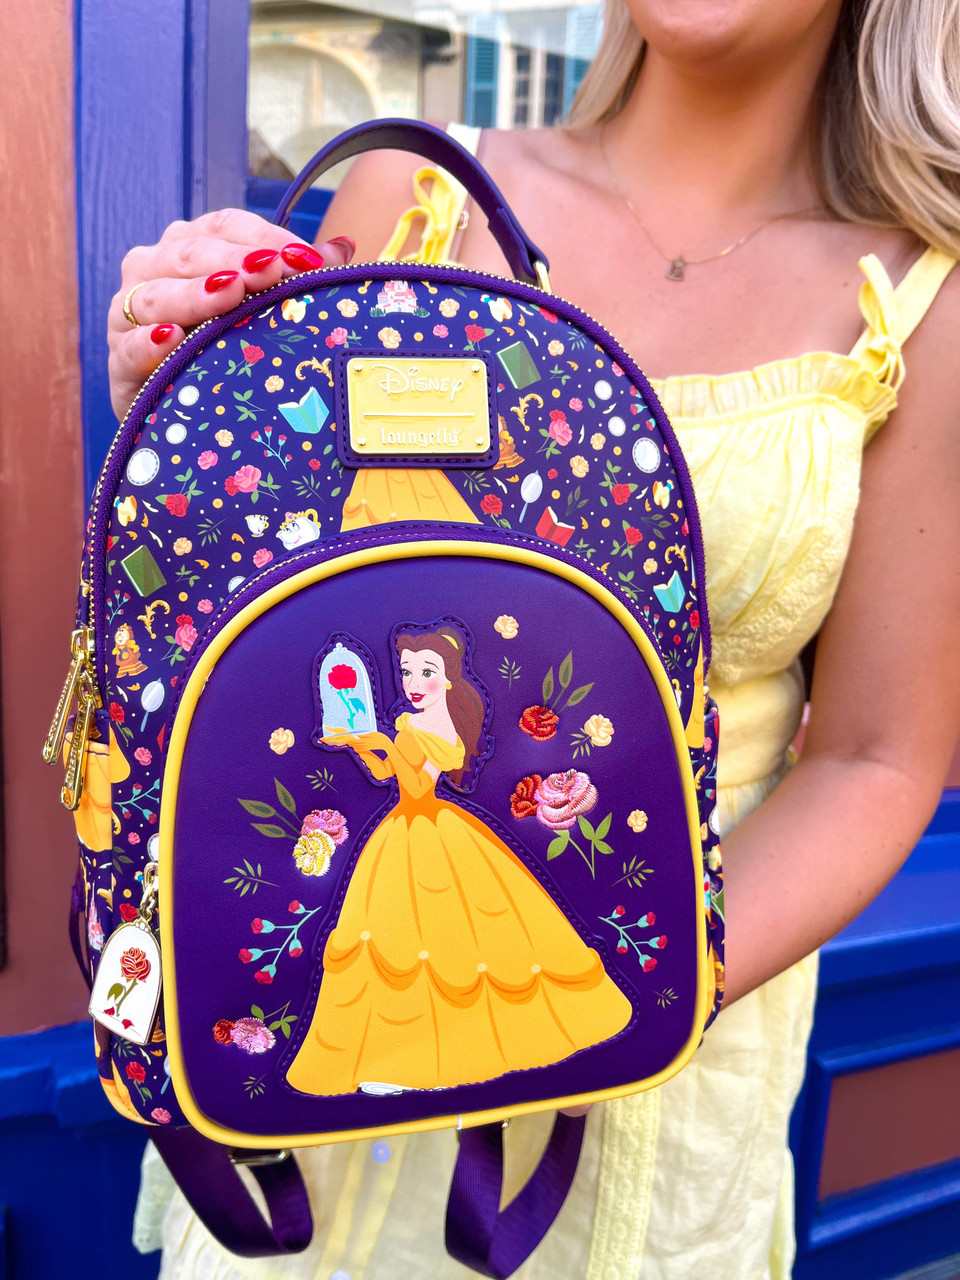 DISNEY - Beauty and the Beast - Belle - Mini Backpack LoungeFly :  : Bag Loungefly DISNEY